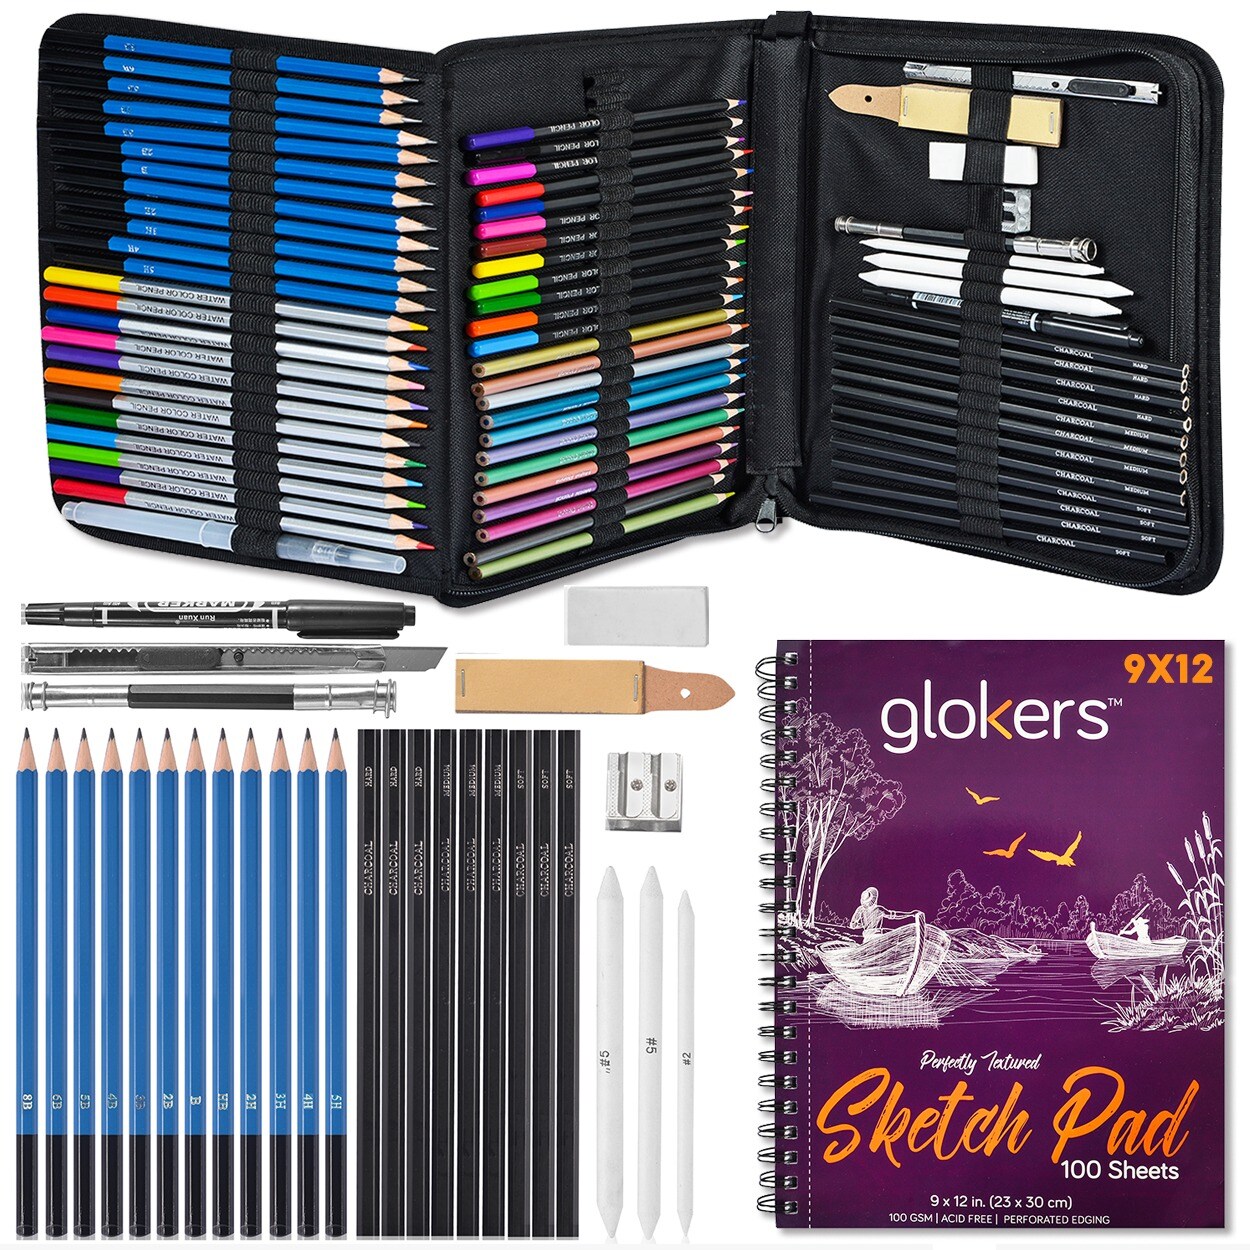  H & B Sketch Pad and Pencil Set 100 pcs Sketching Pencils Set  with Sketch Book Drawing Sets for Adults with Watercolor Pencils, Sketching  Pencils for Artists,Begineers and Kids 